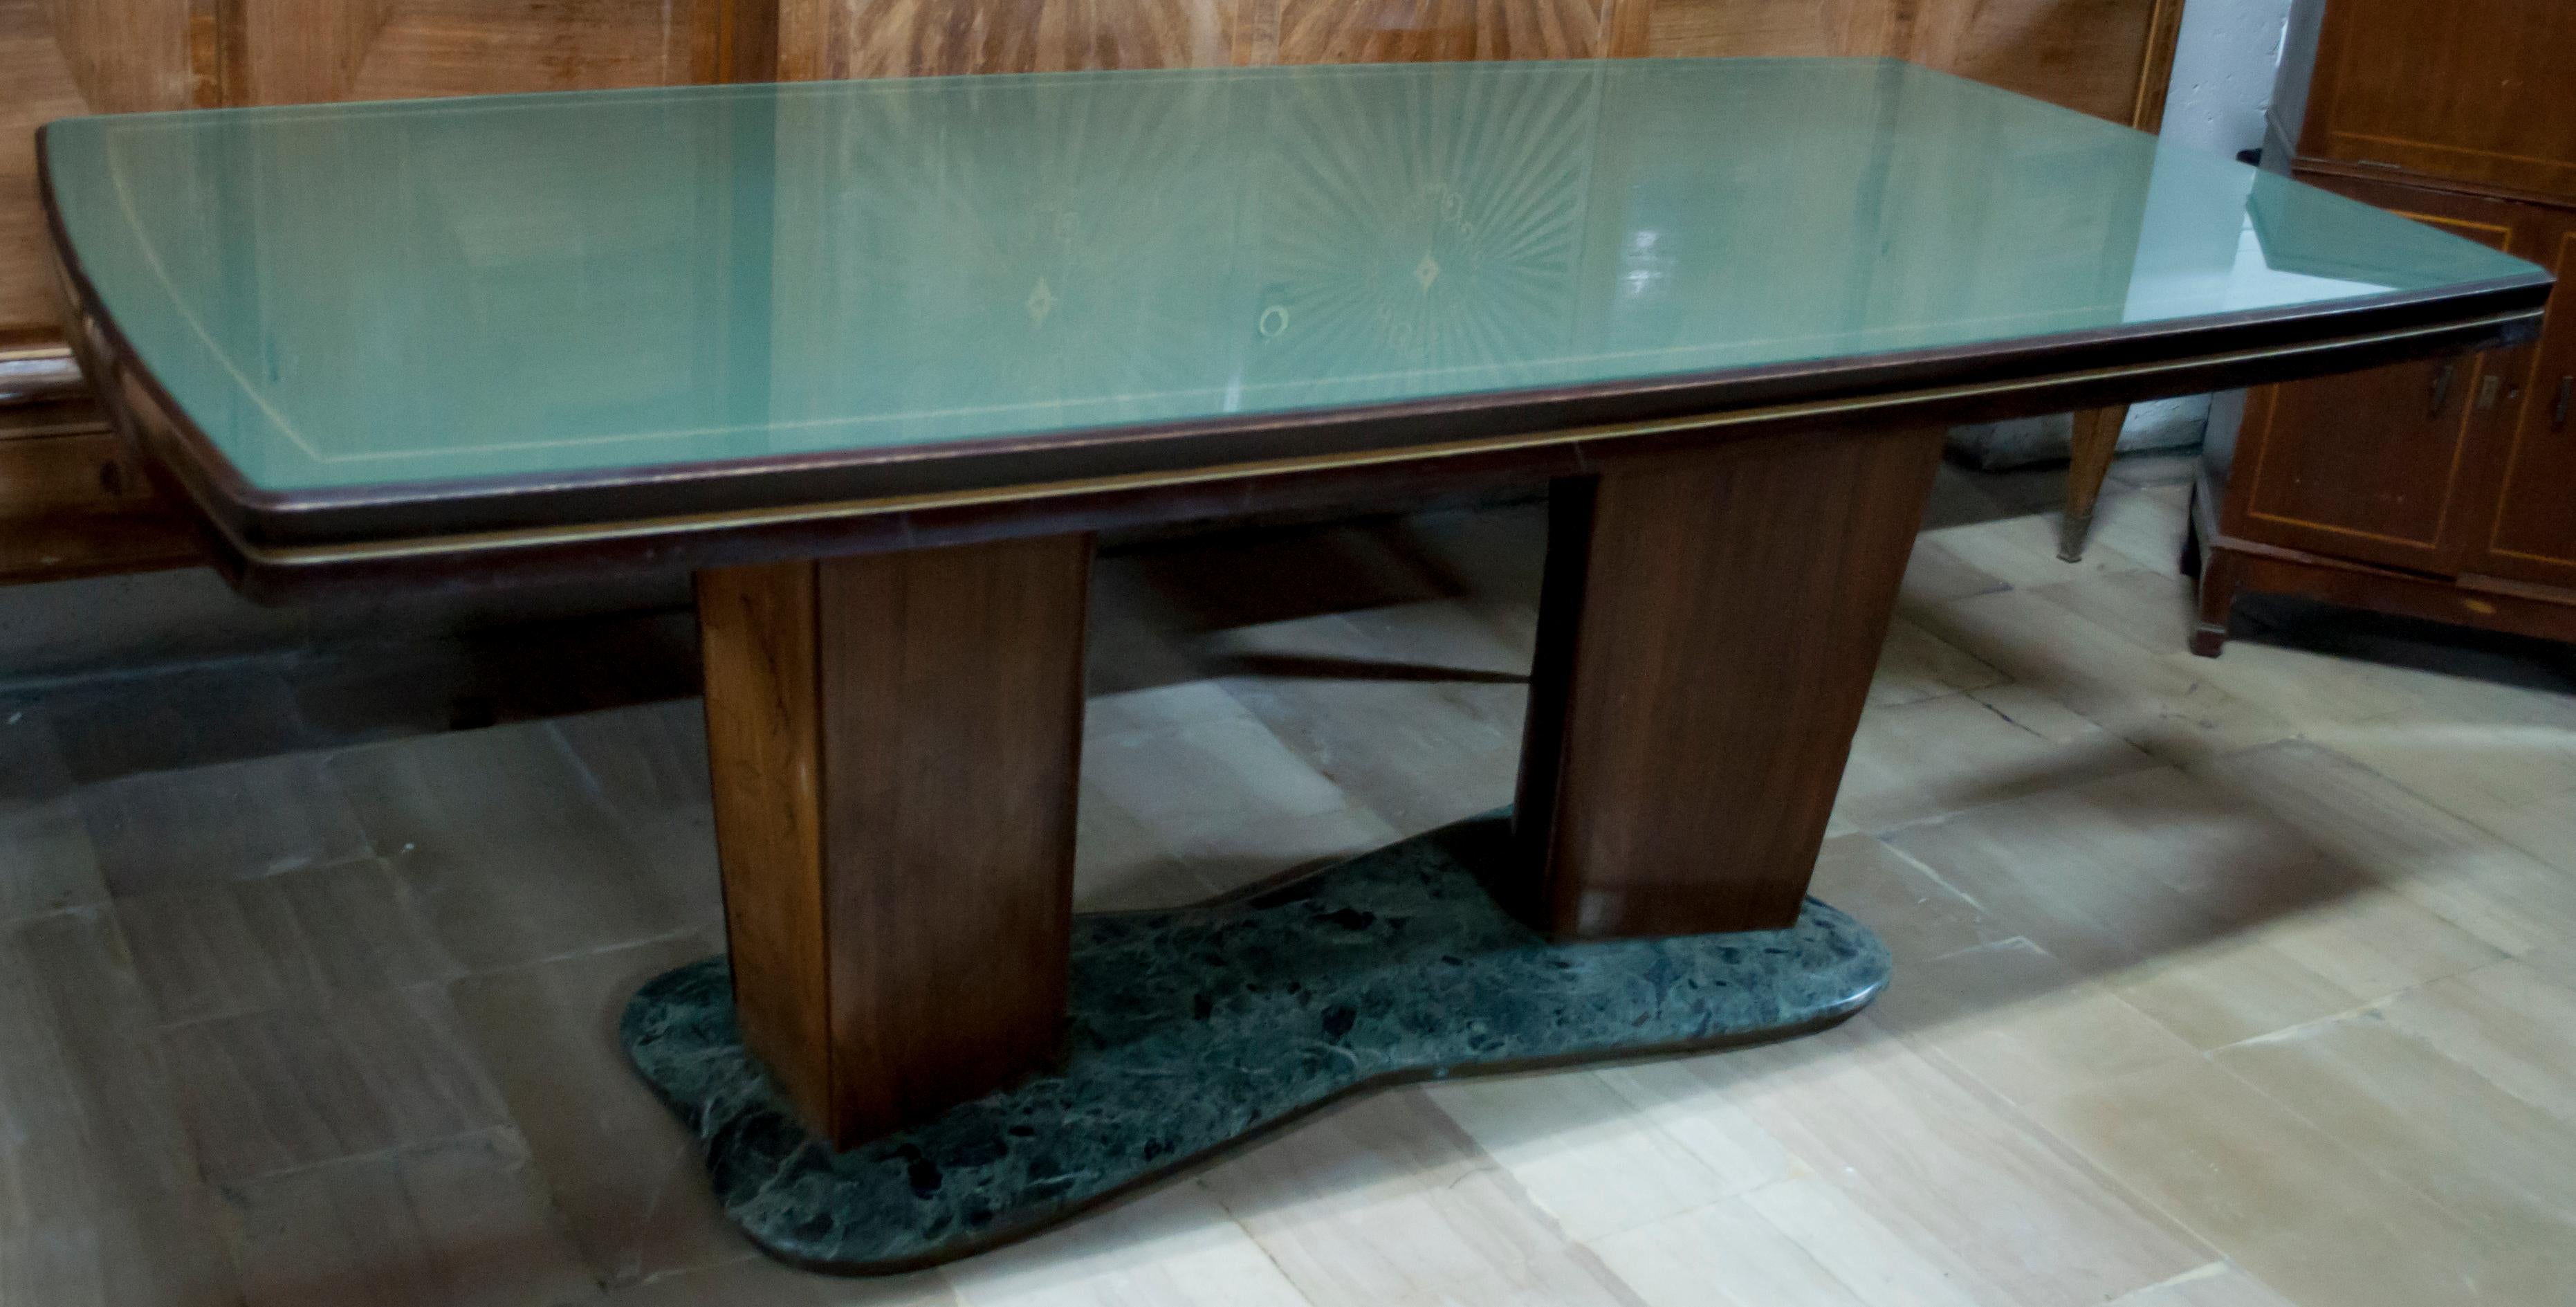 This table was designed by the famous Italian design Vittorio Dassi, Italy 1950, the table has a rectangular green glass top, the top is supported by two large bases in rosewood and maple, the bases are carved in relief, resting on a base of green